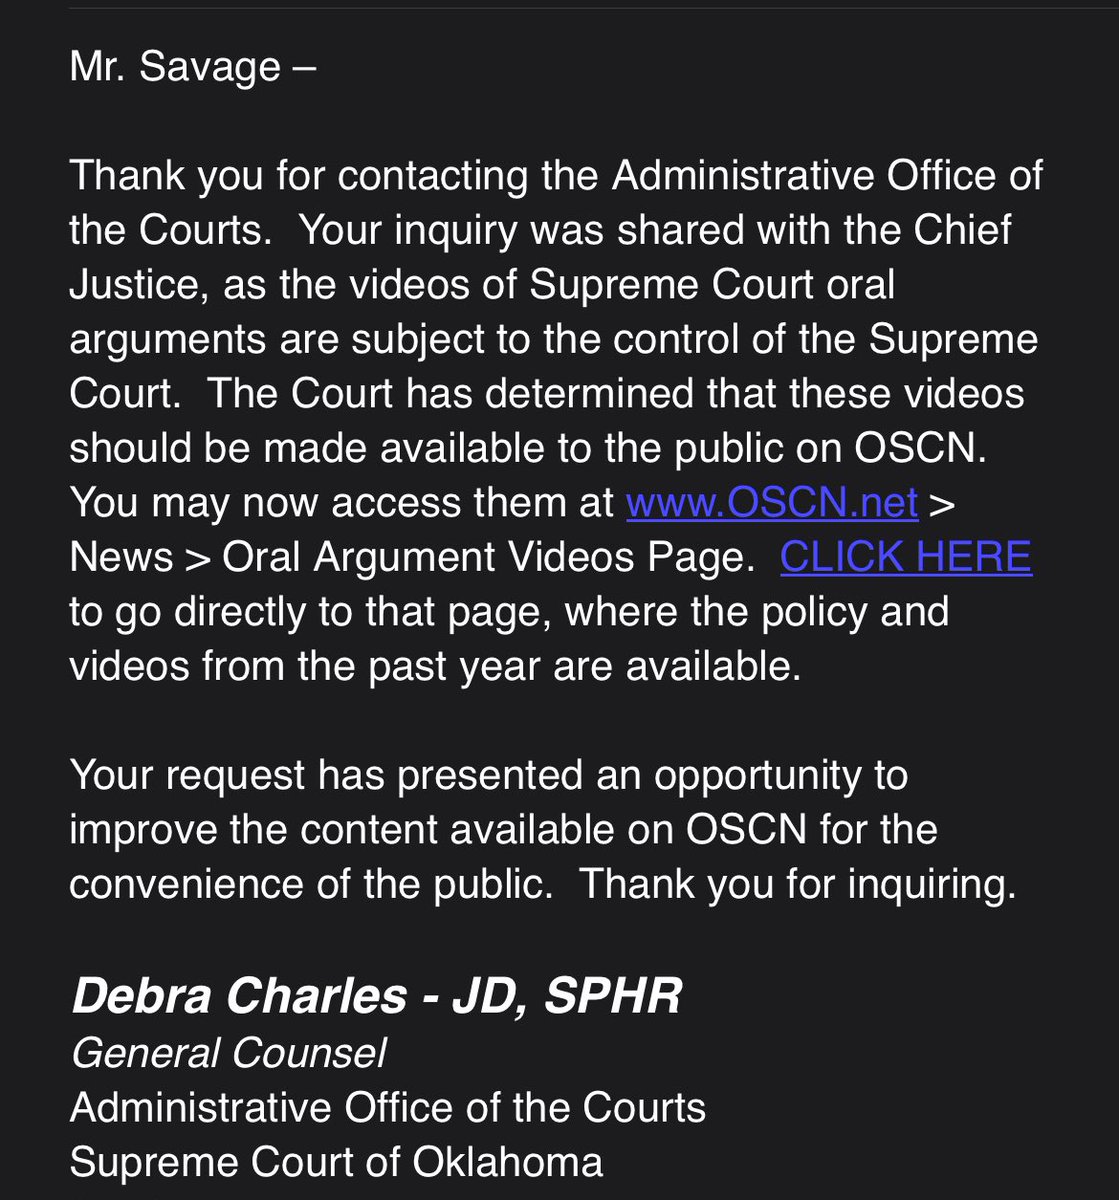 Some positive public records news to share: Videos of past oral arguments before the #Oklahoma Supreme Court can now be viewed here: oscn.net/static/pastora… I greatly appreciate the decision by Chief Justice Kane and the Court to improve access to important proceedings.